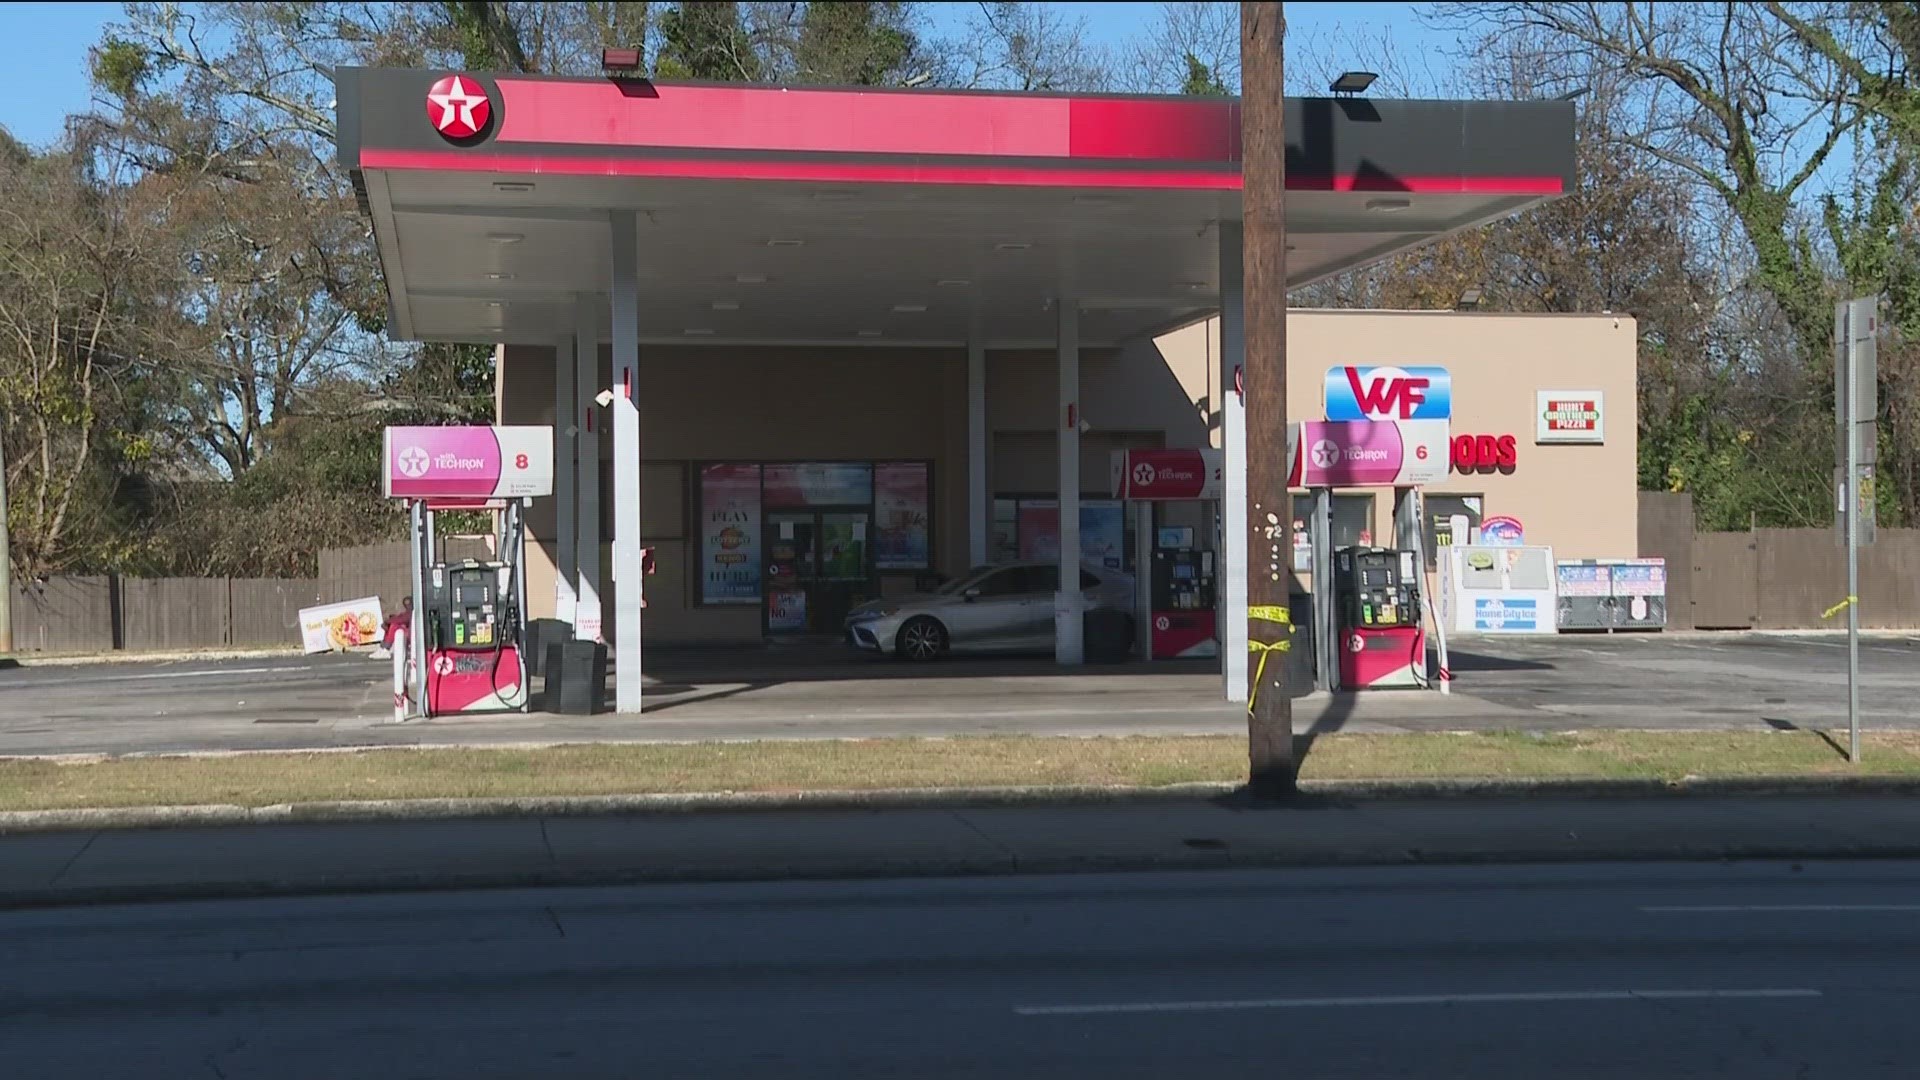 Recently, three people were shot at the gas station on Lee Street, but no one was arrested.